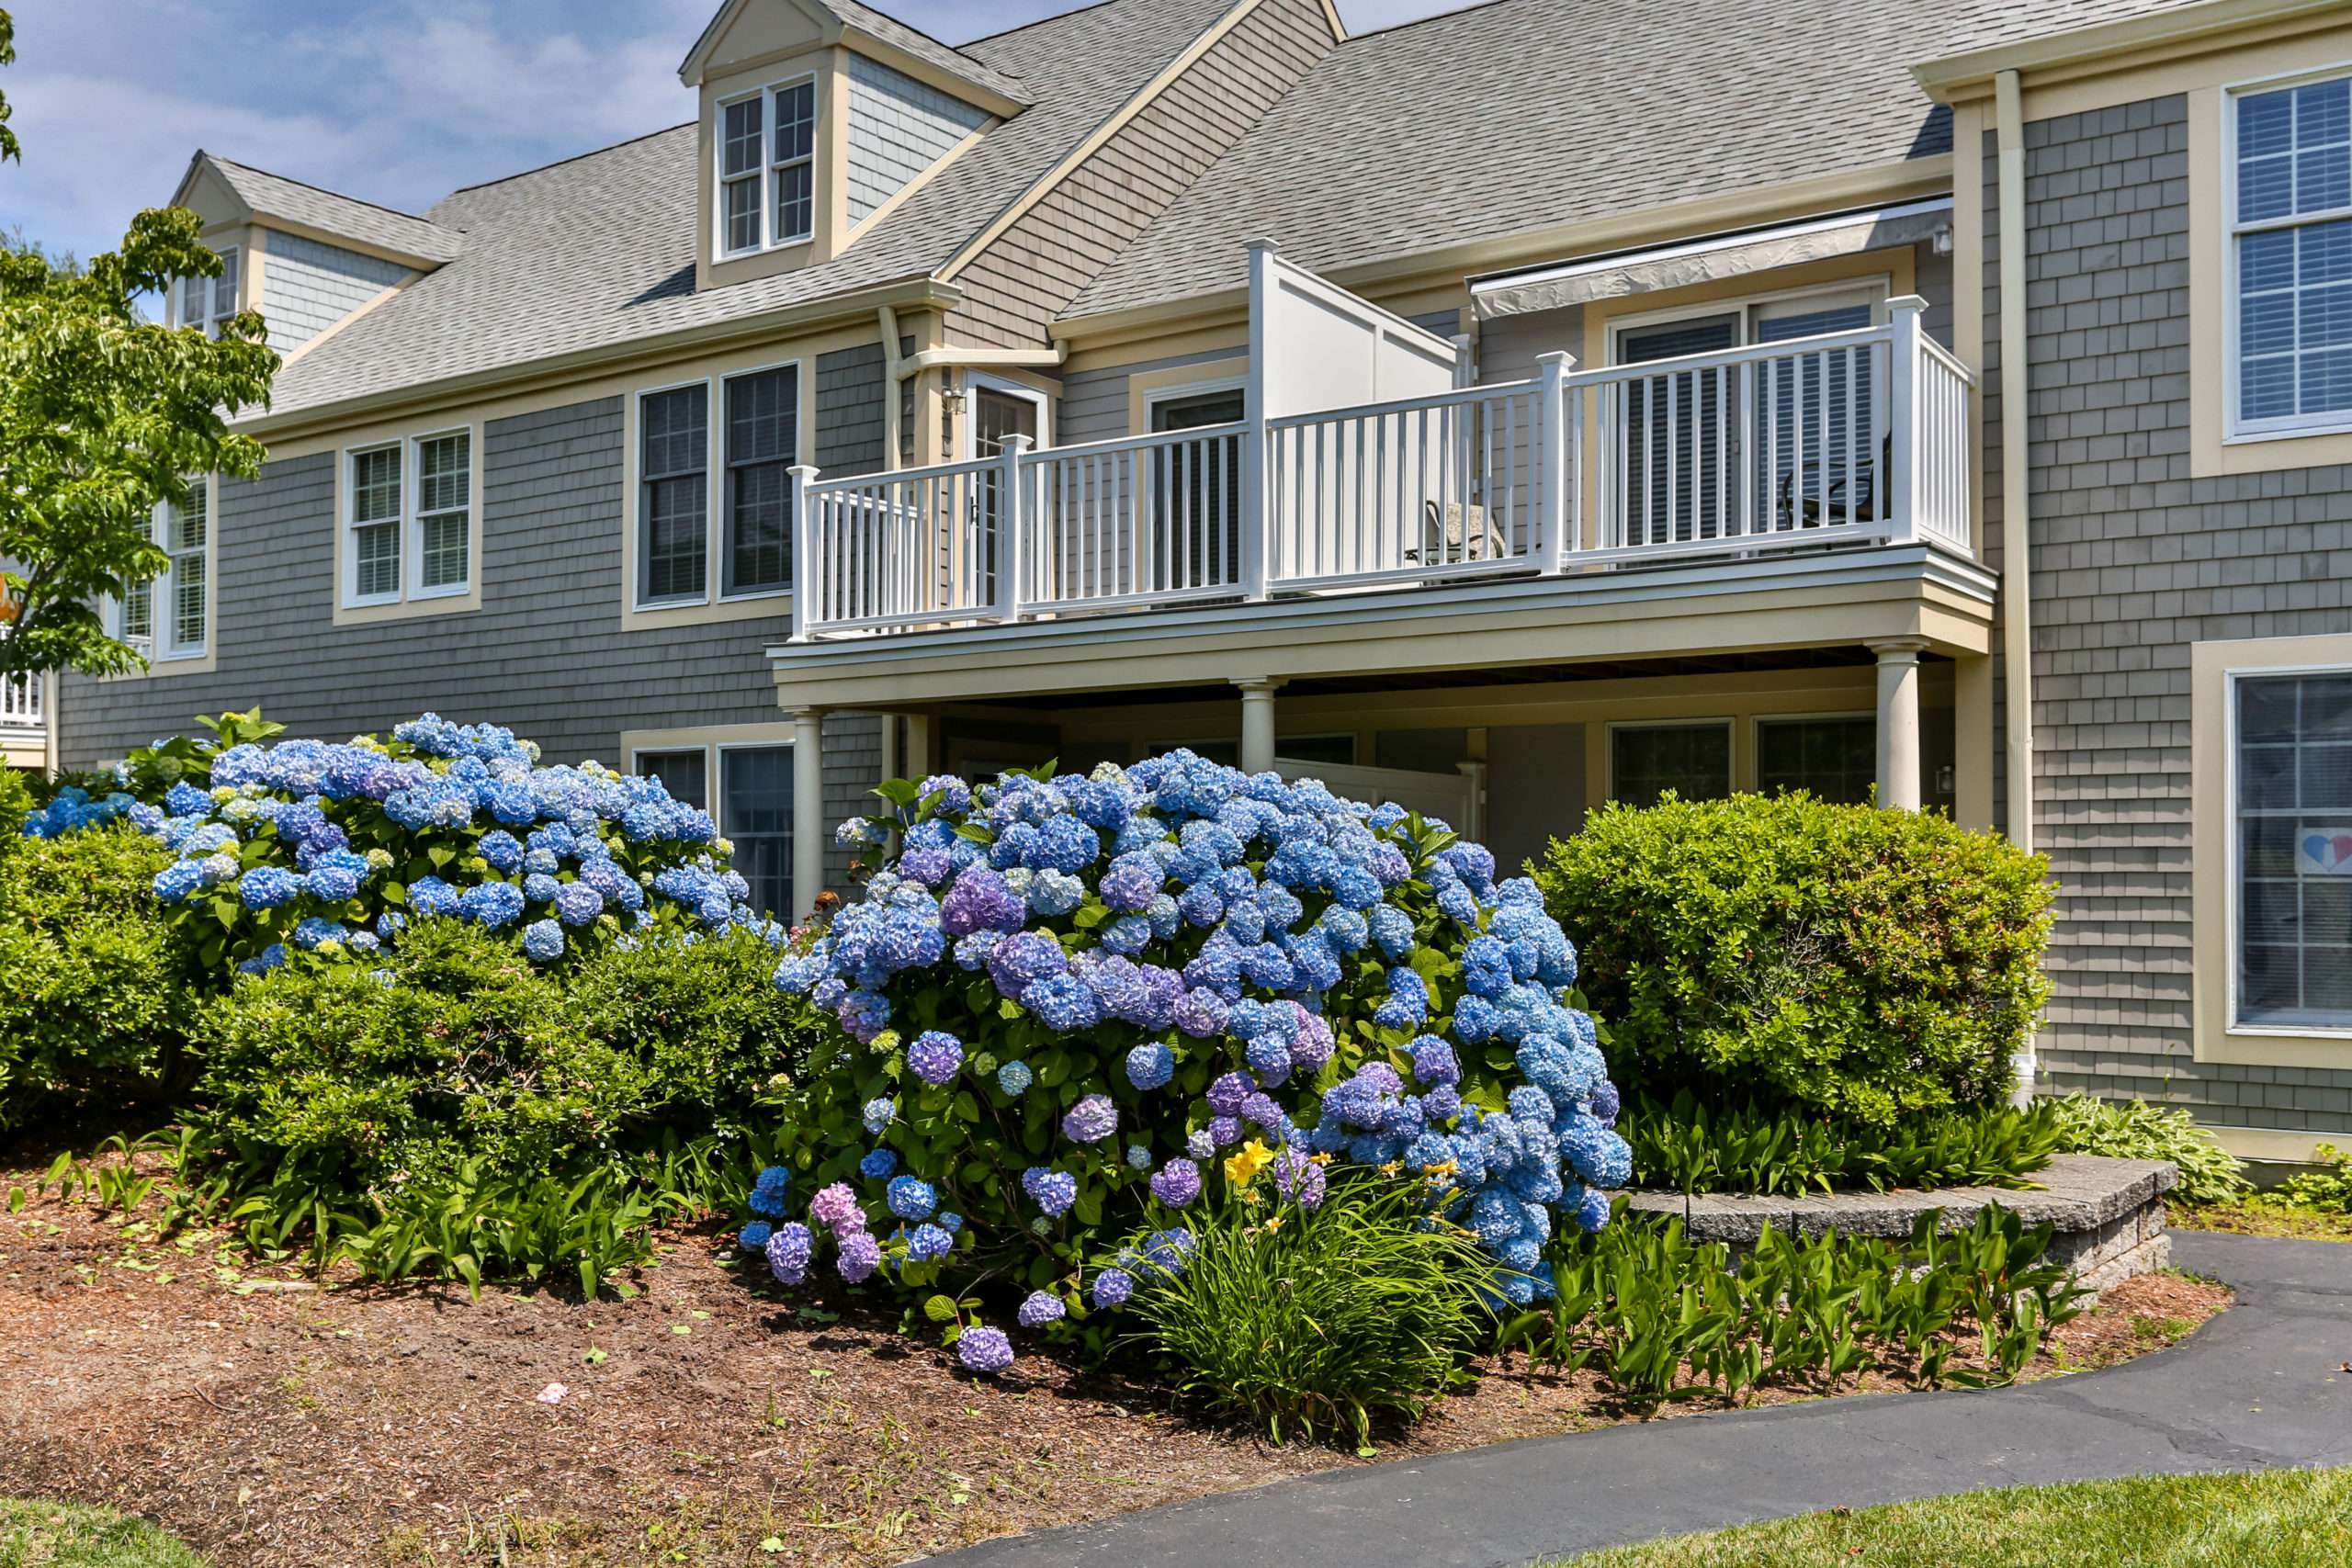 Hydrangeas in front of the building